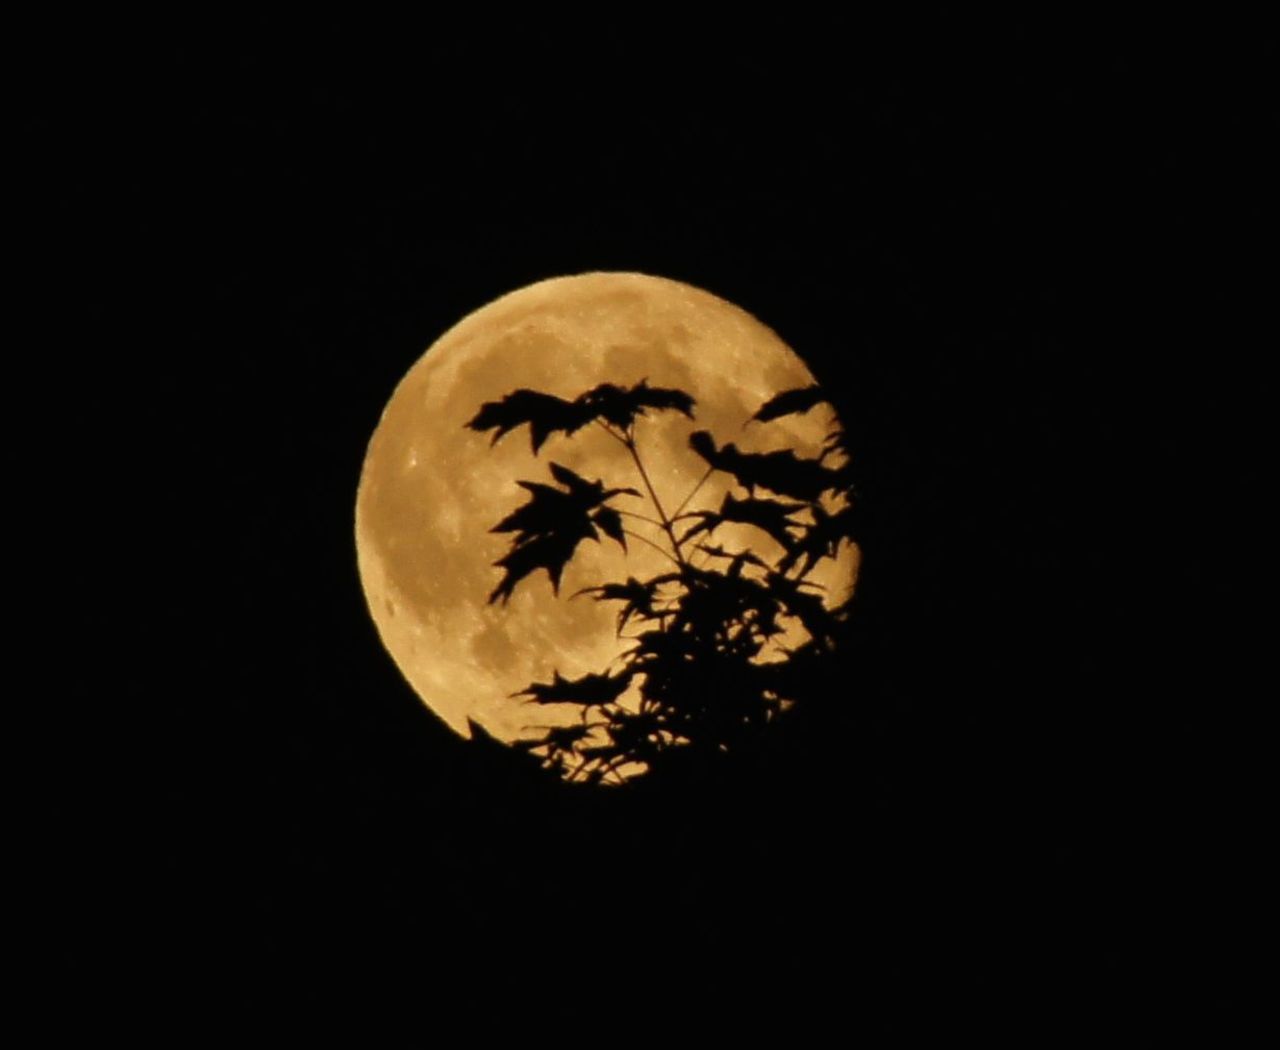 The July supermoon was the best one iReporter <a href="http://ireport.cnn.com/docs/DOC-1152414">Vijay Pandrangi</a> has ever seen. The software engineer from Bothell, Washington, said he can't wait to see the supermoon again on August 10.